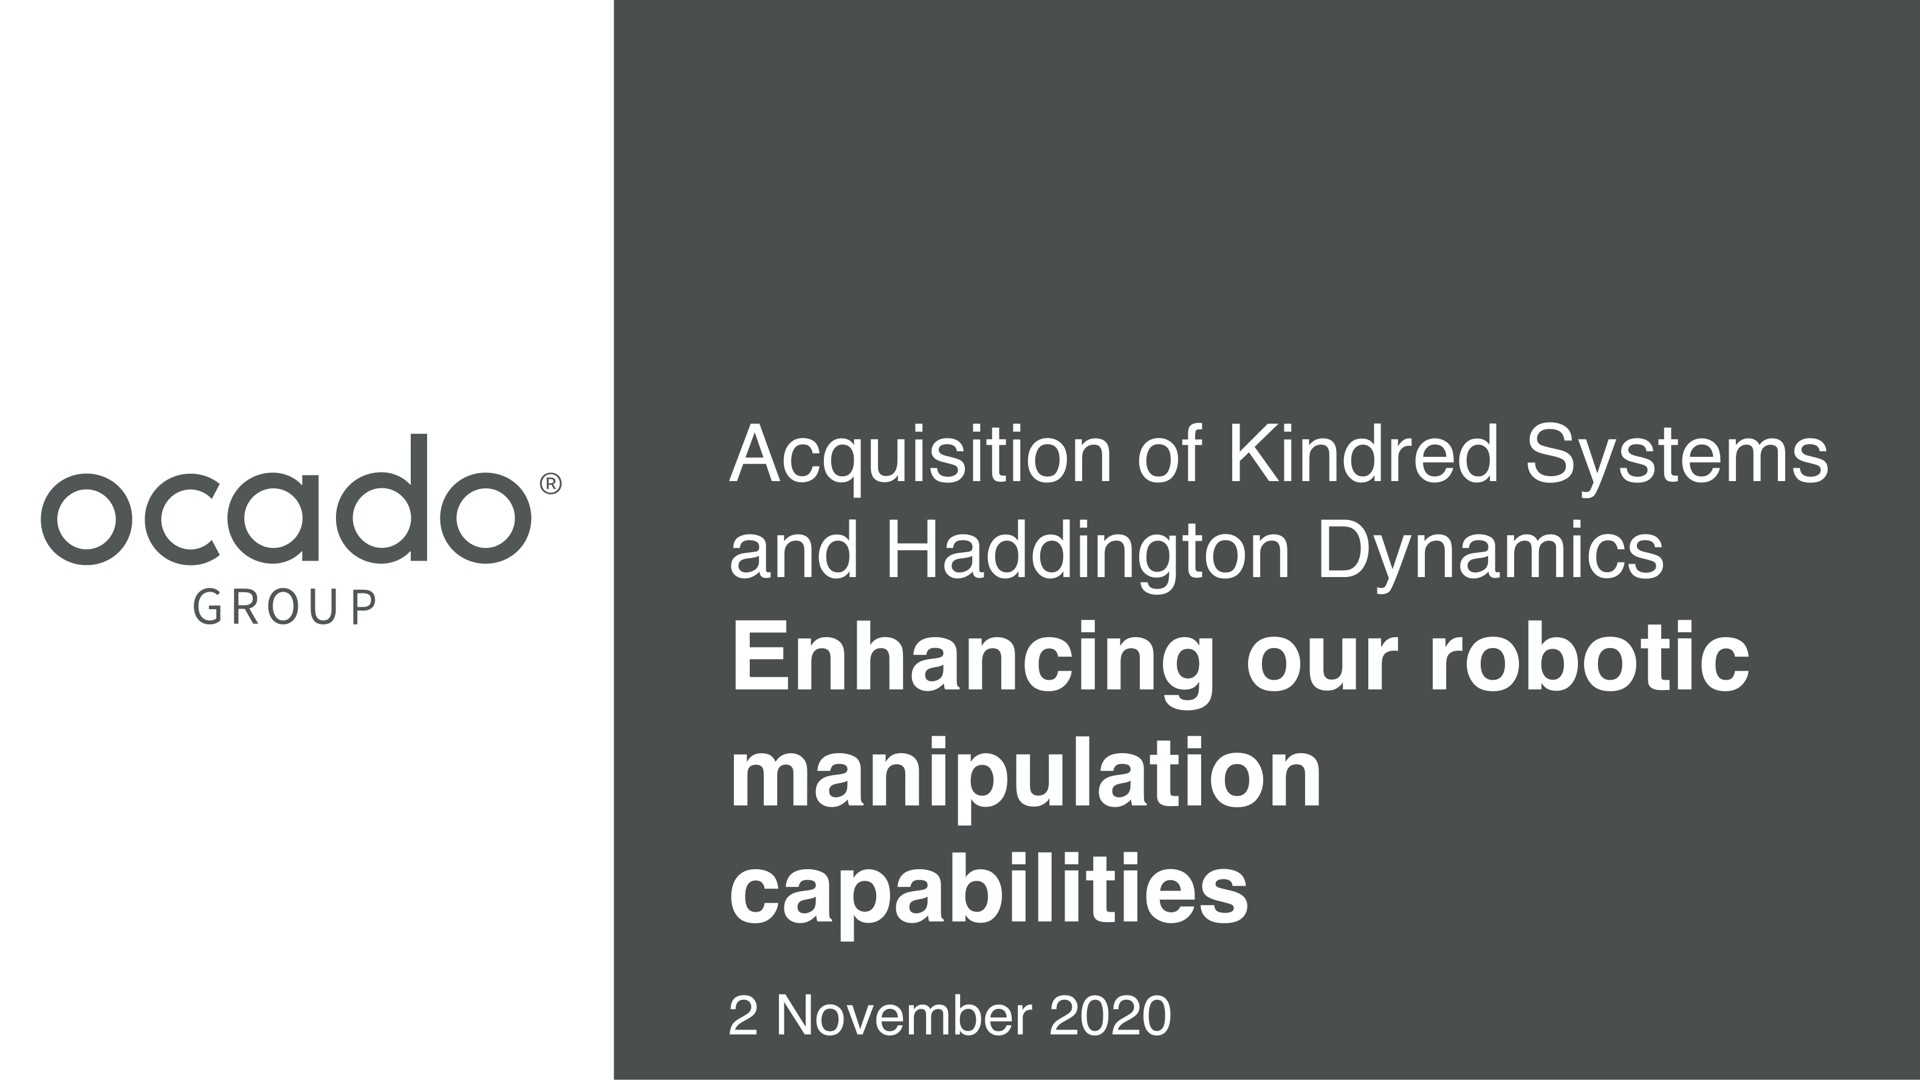 acquisition of kindred systems and dynamics enhancing our manipulation capabilities | Ocado